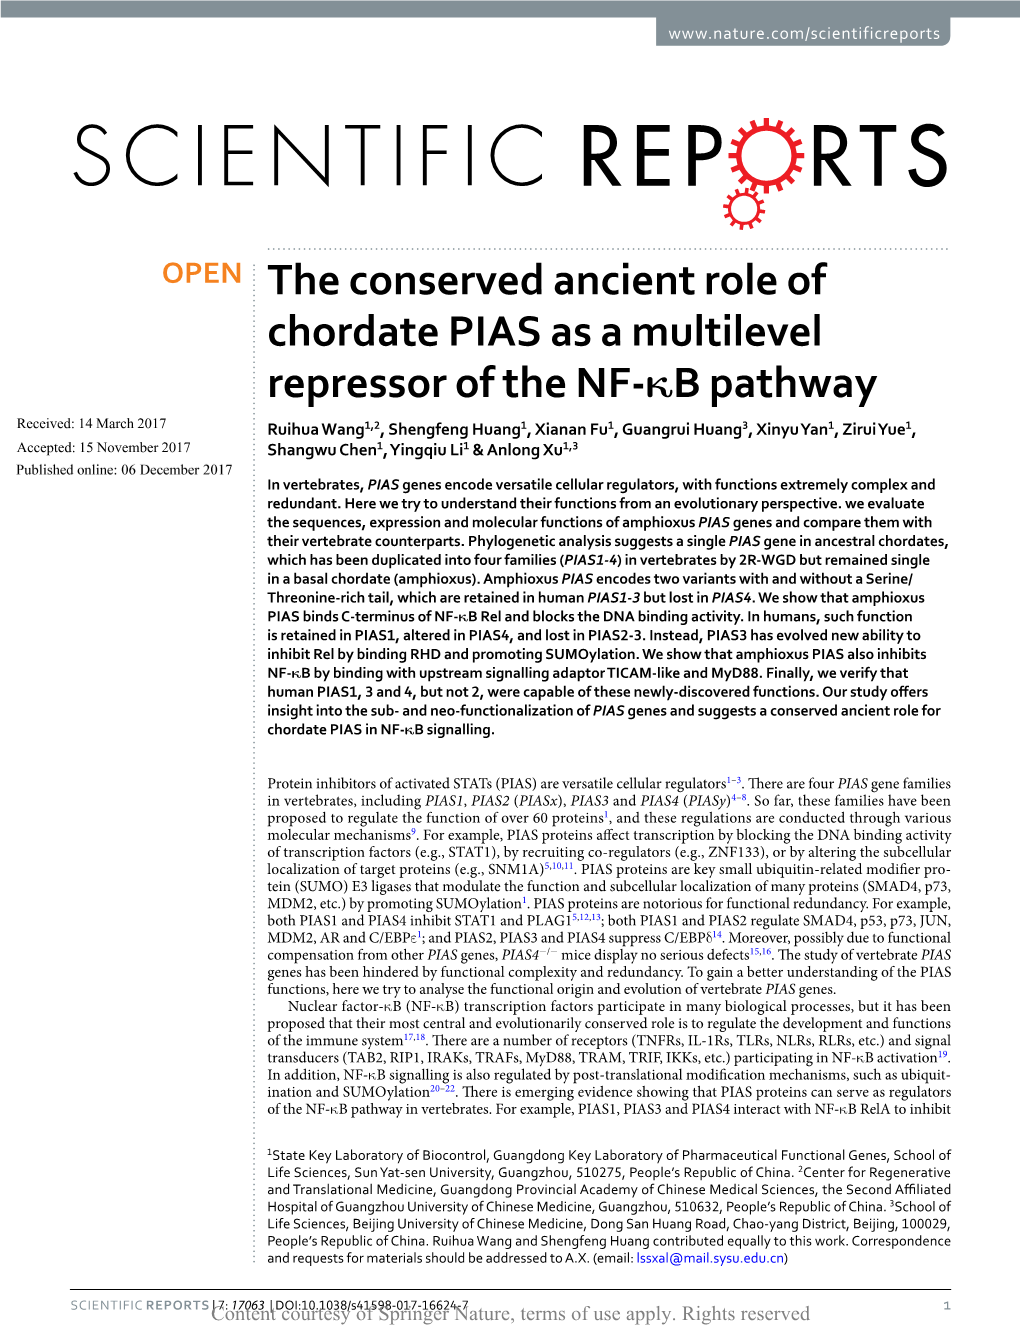 The Conserved Ancient Role of Chordate PIAS As a Multilevel